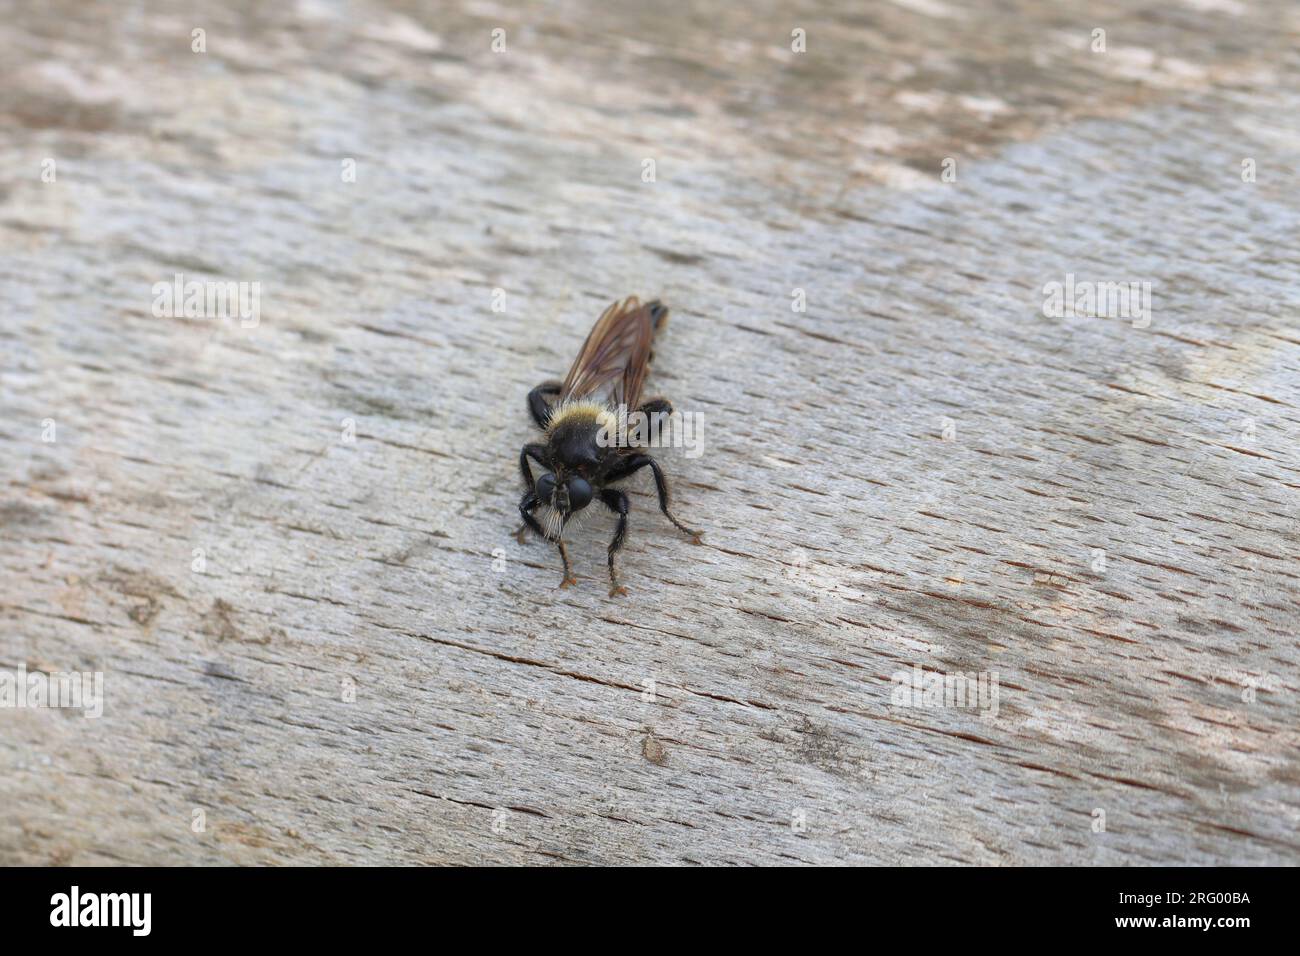 Raubfliege,females of Laphria ephippium. A large, ferocious fly from the Asilidae family, Robber fly. Stock Photo